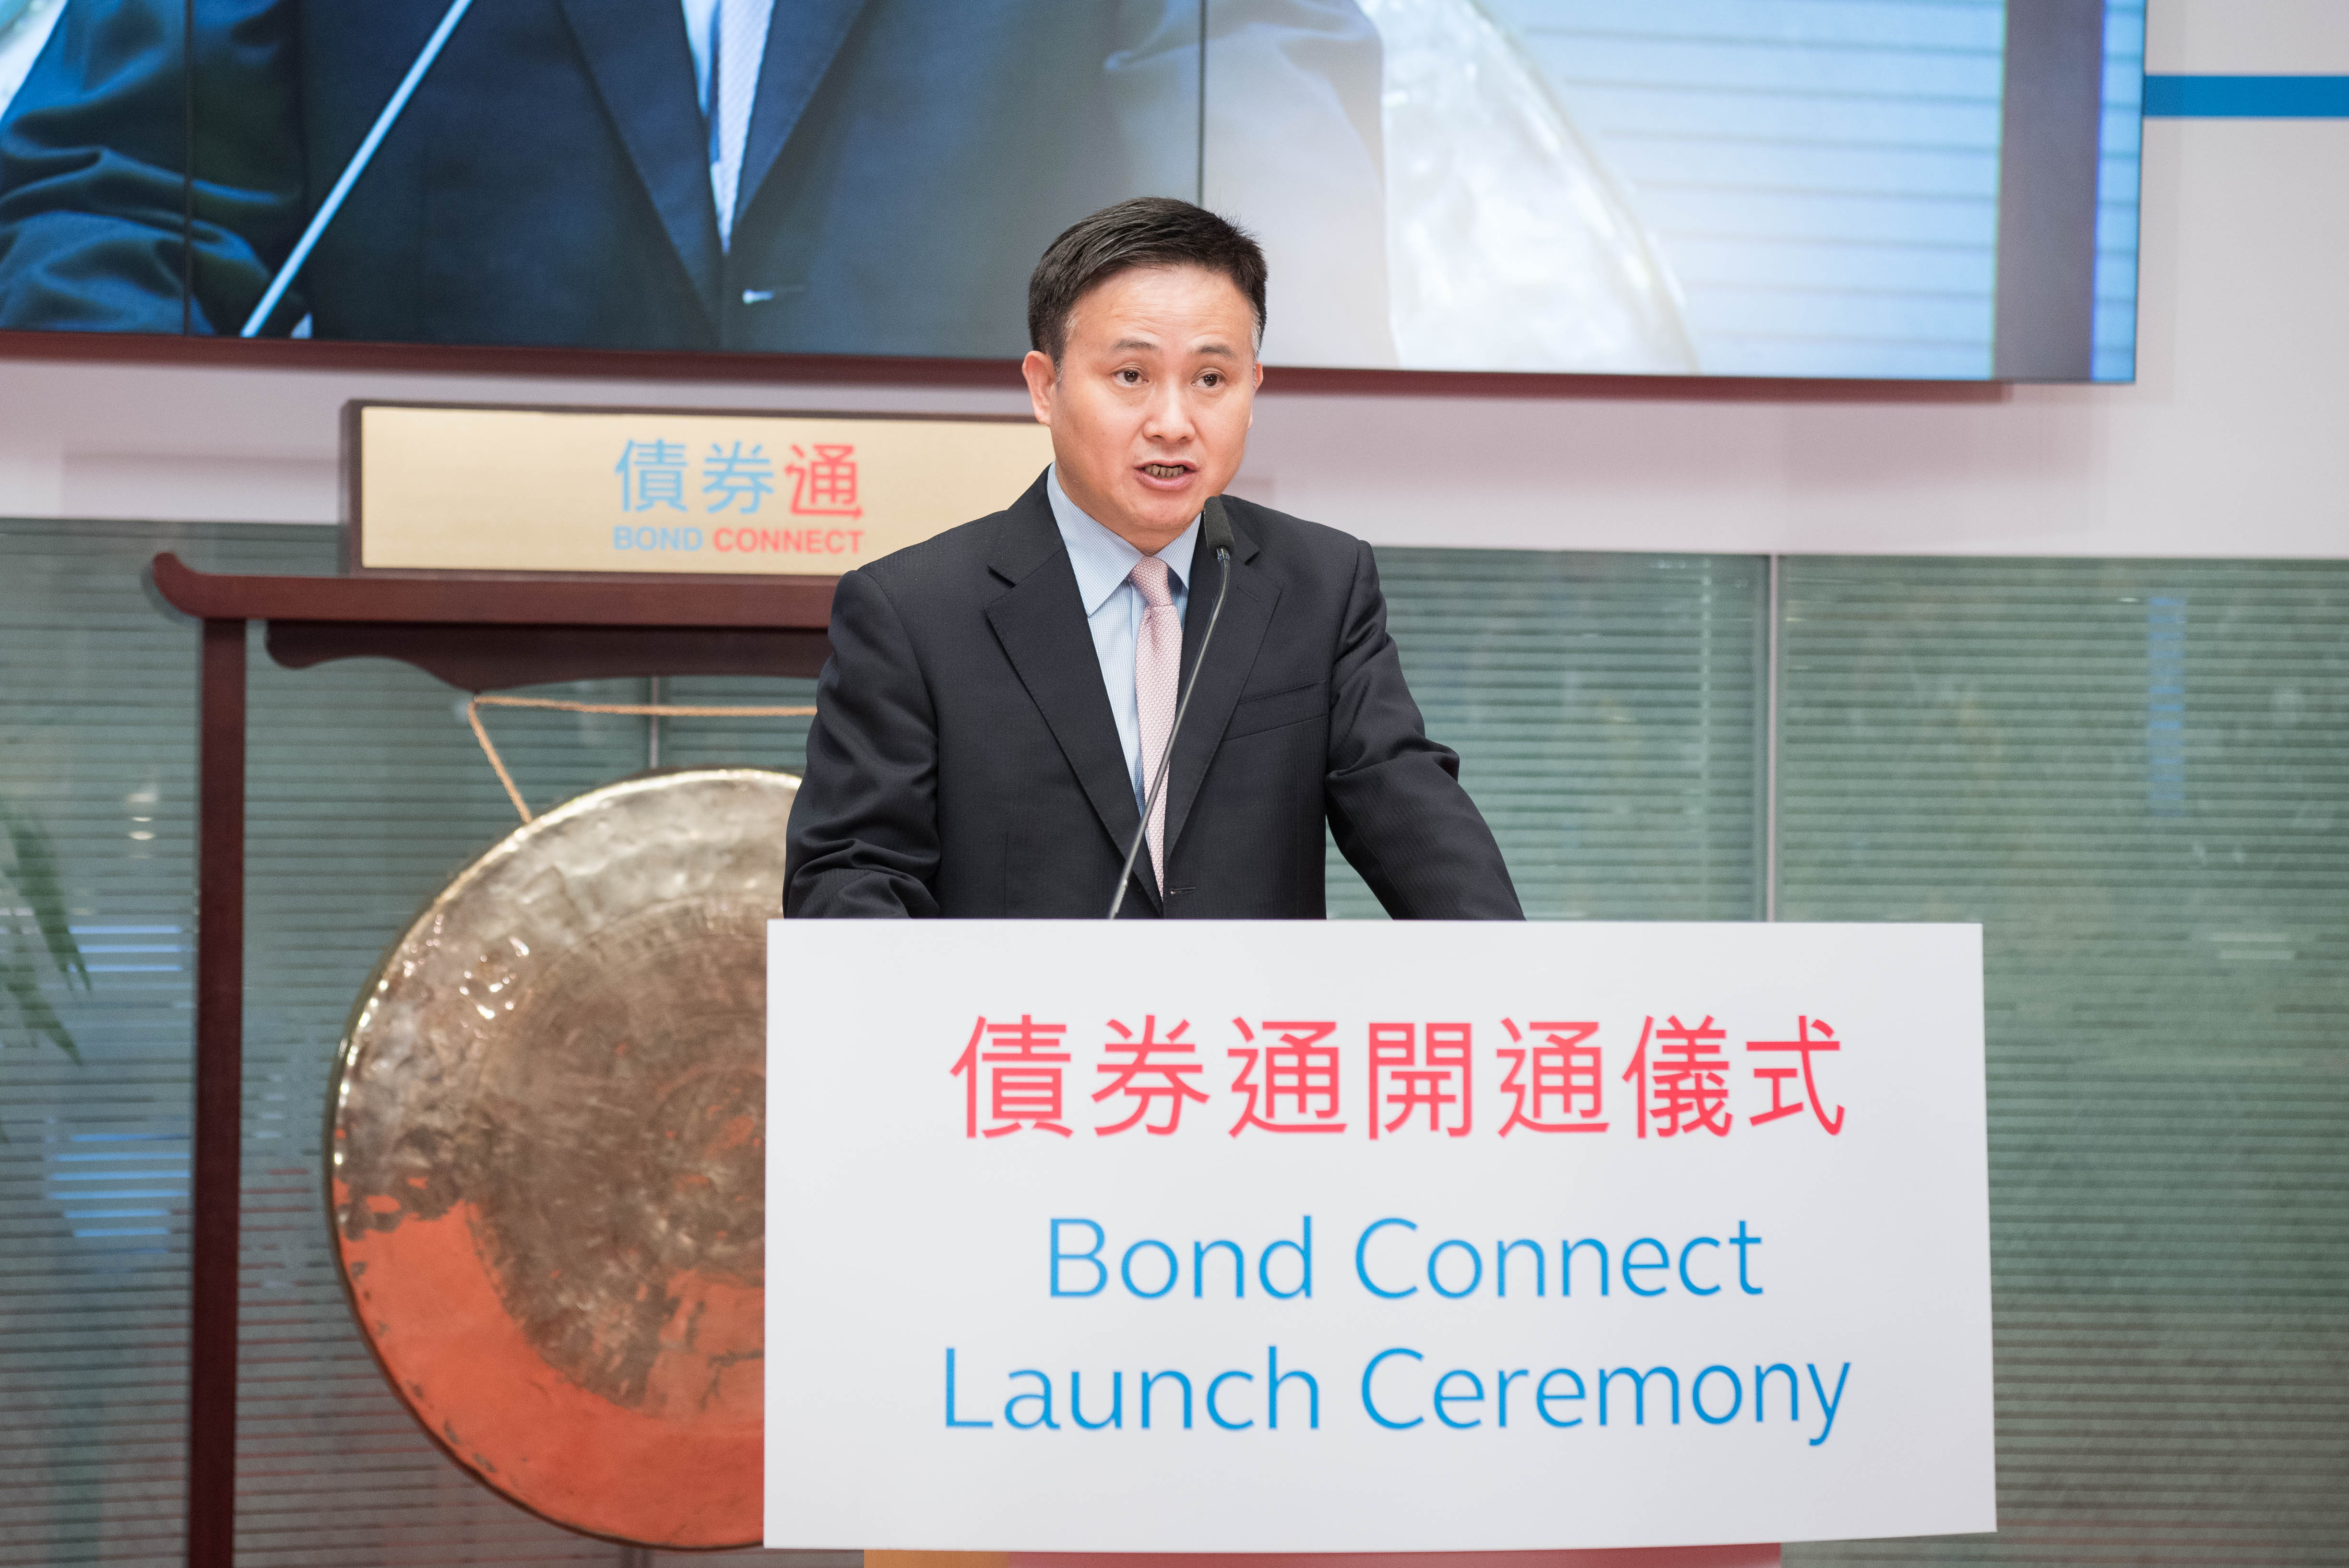 Bond Connect Successfully Launched